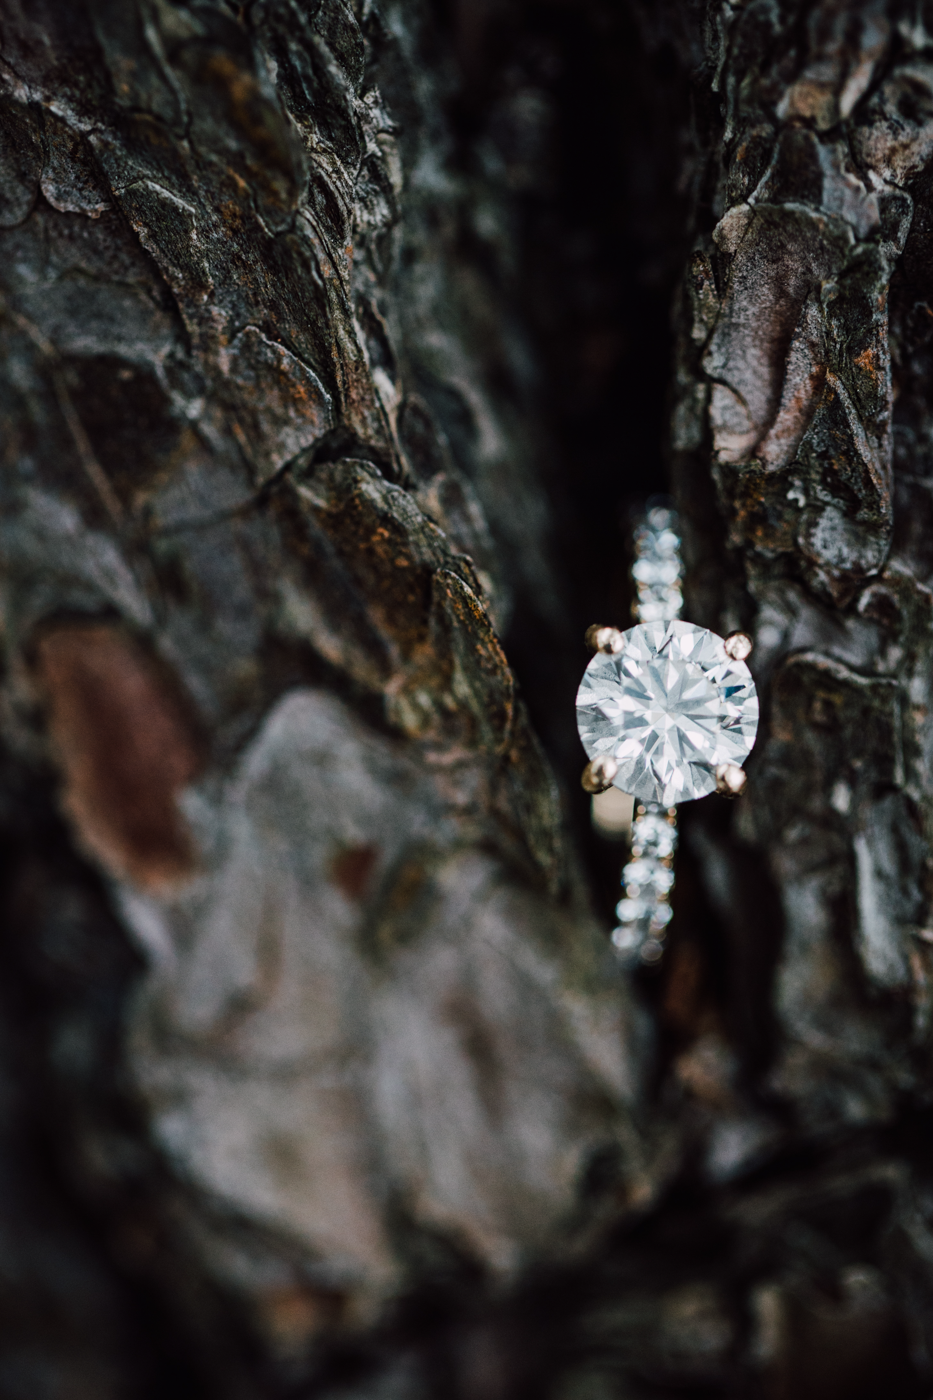  Closeup of a solitaire diamond engagement ring nestled among tree bark 